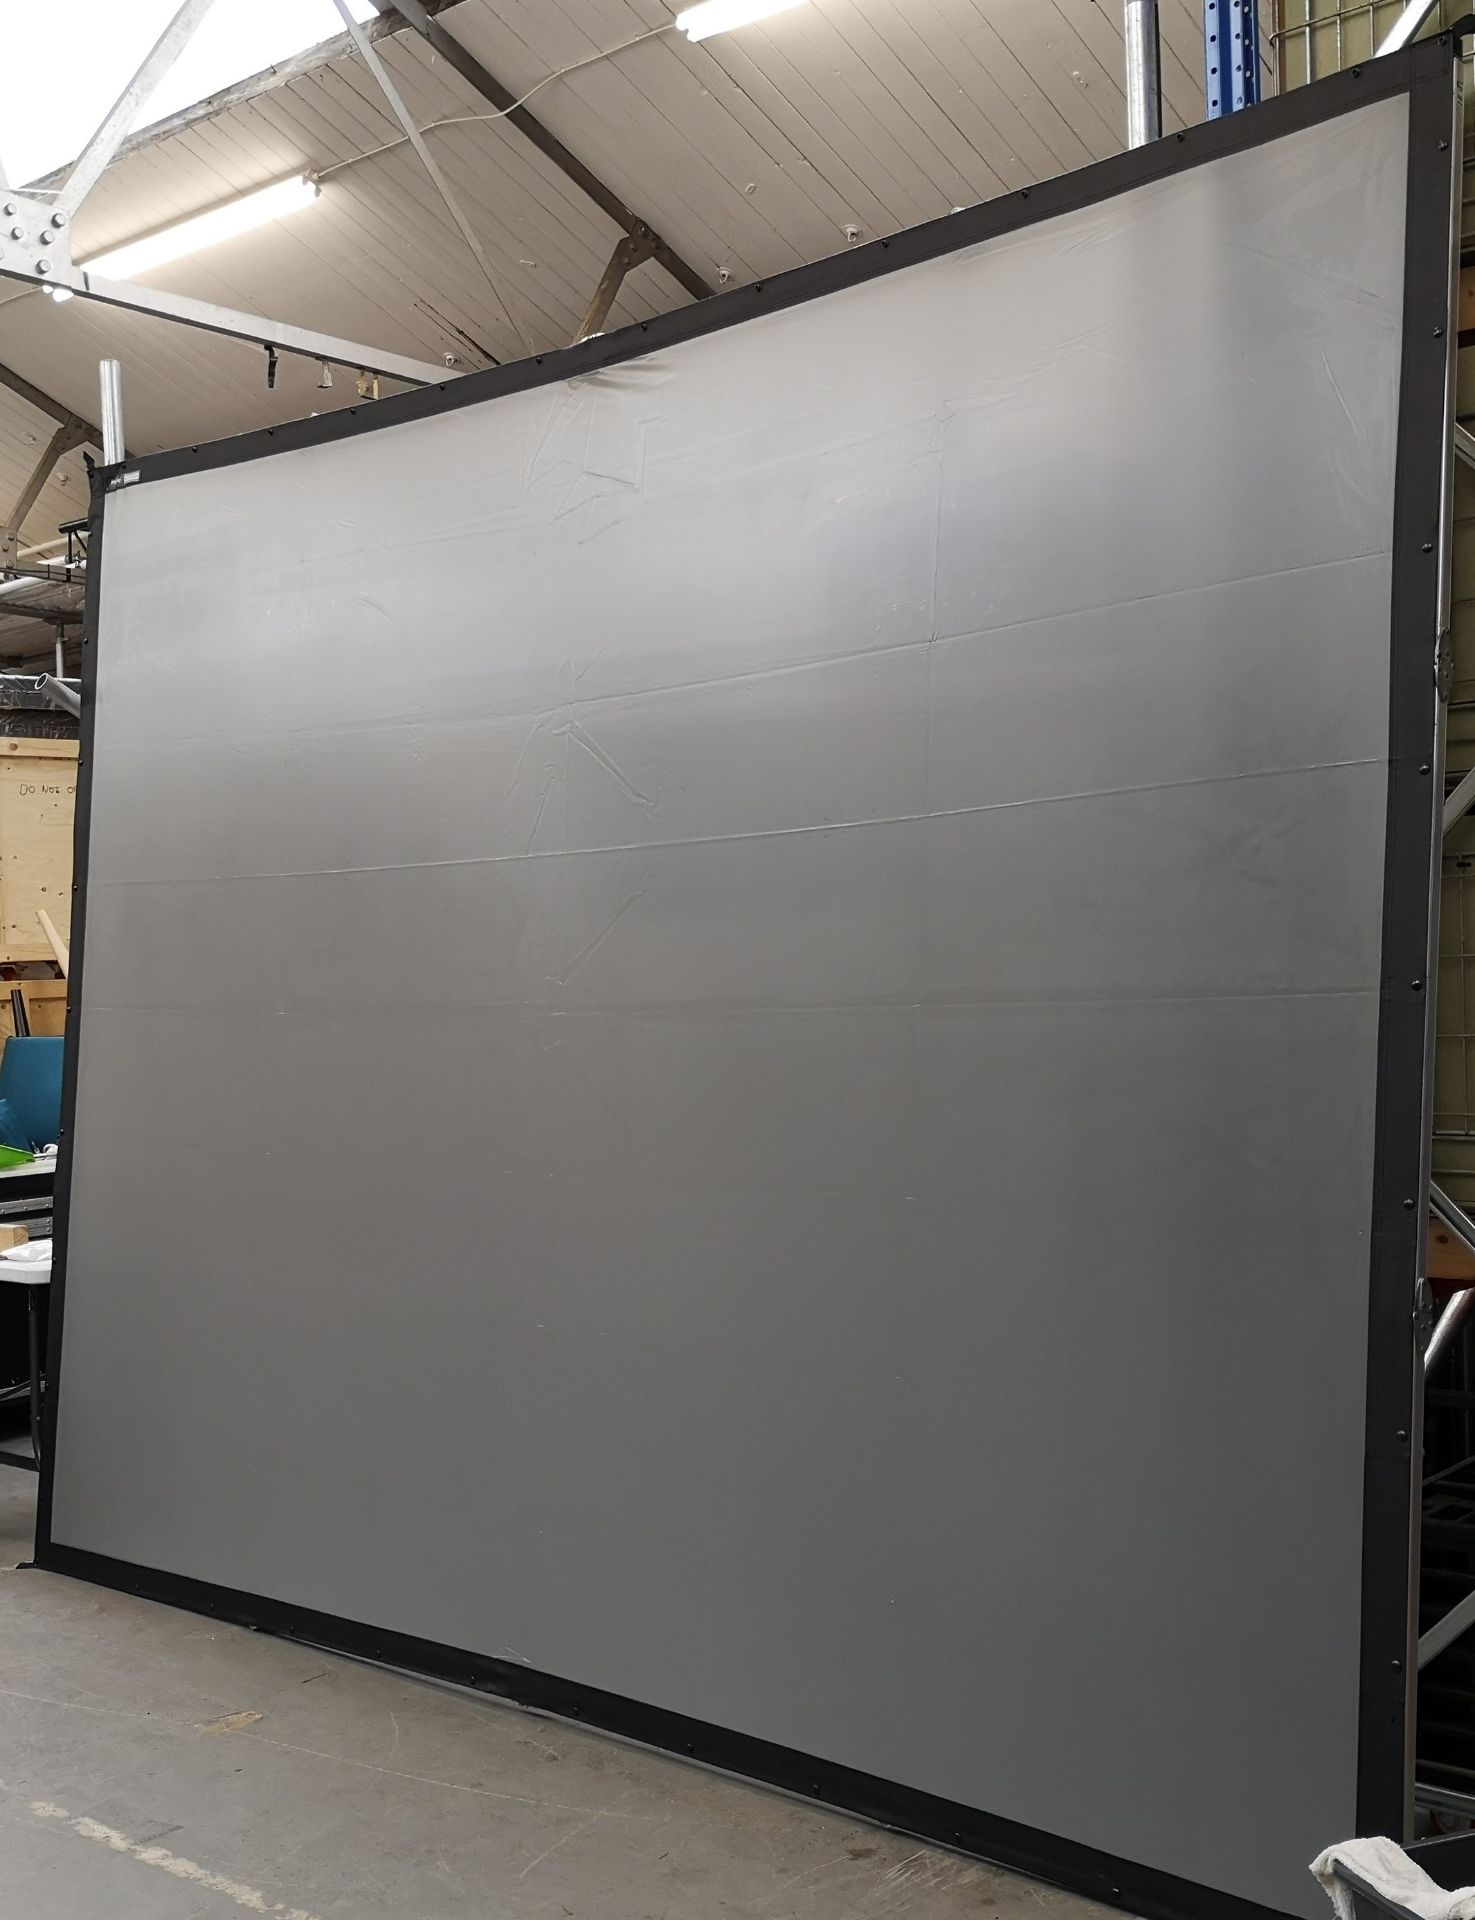 A DA-LITE 12ft x 9ft Rear Projection Fastfold Screen with frame, legs, bolts, screen surface, bag - Image 6 of 10